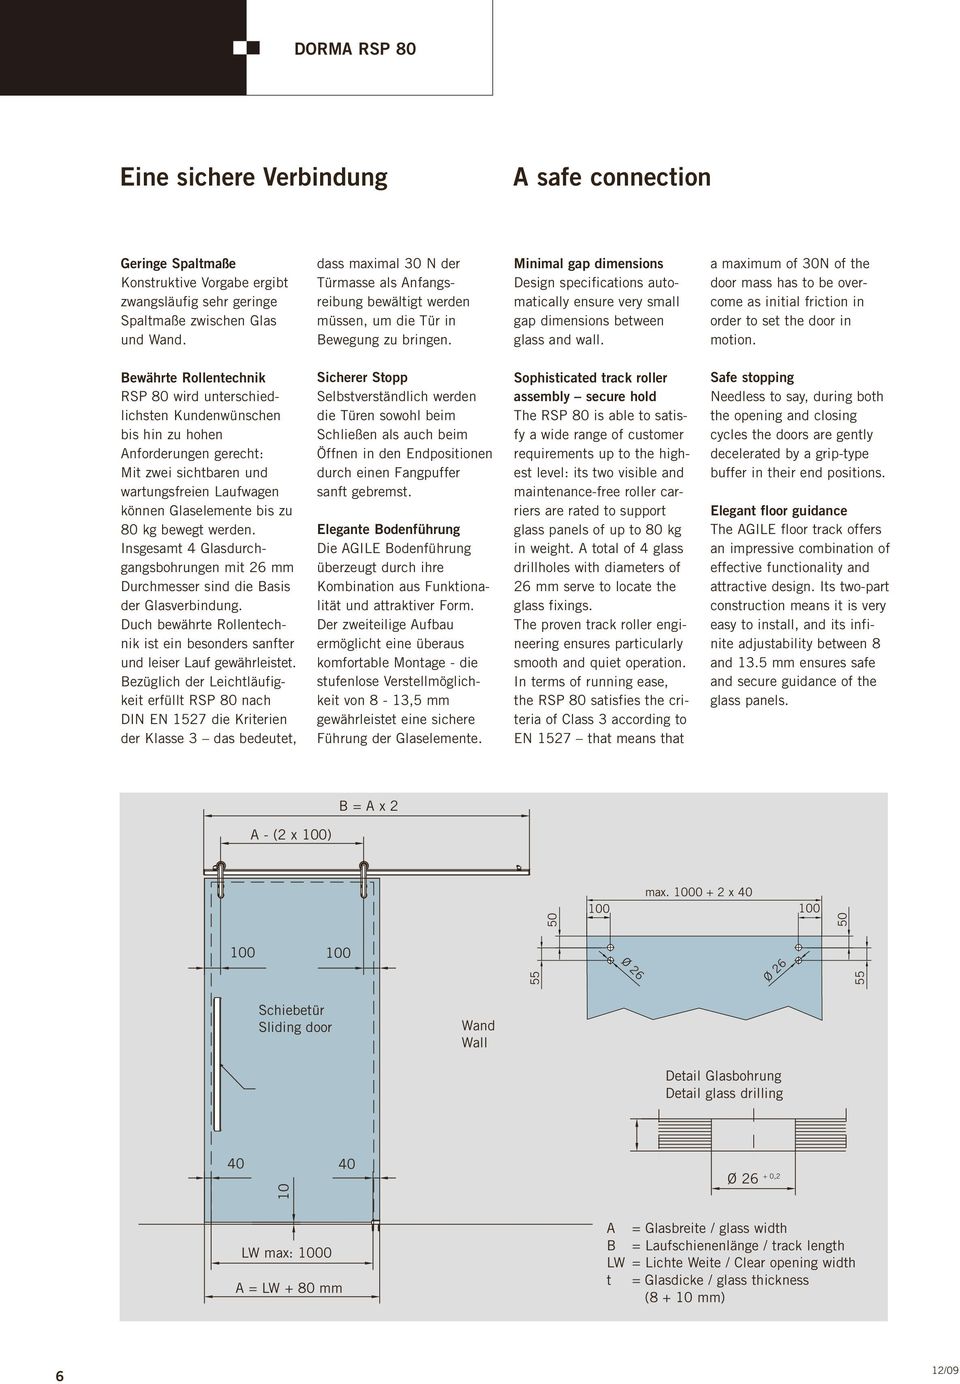 Minimal gap dimensions Design specifications automatically ensure very small gap dimensions between glass and wall.